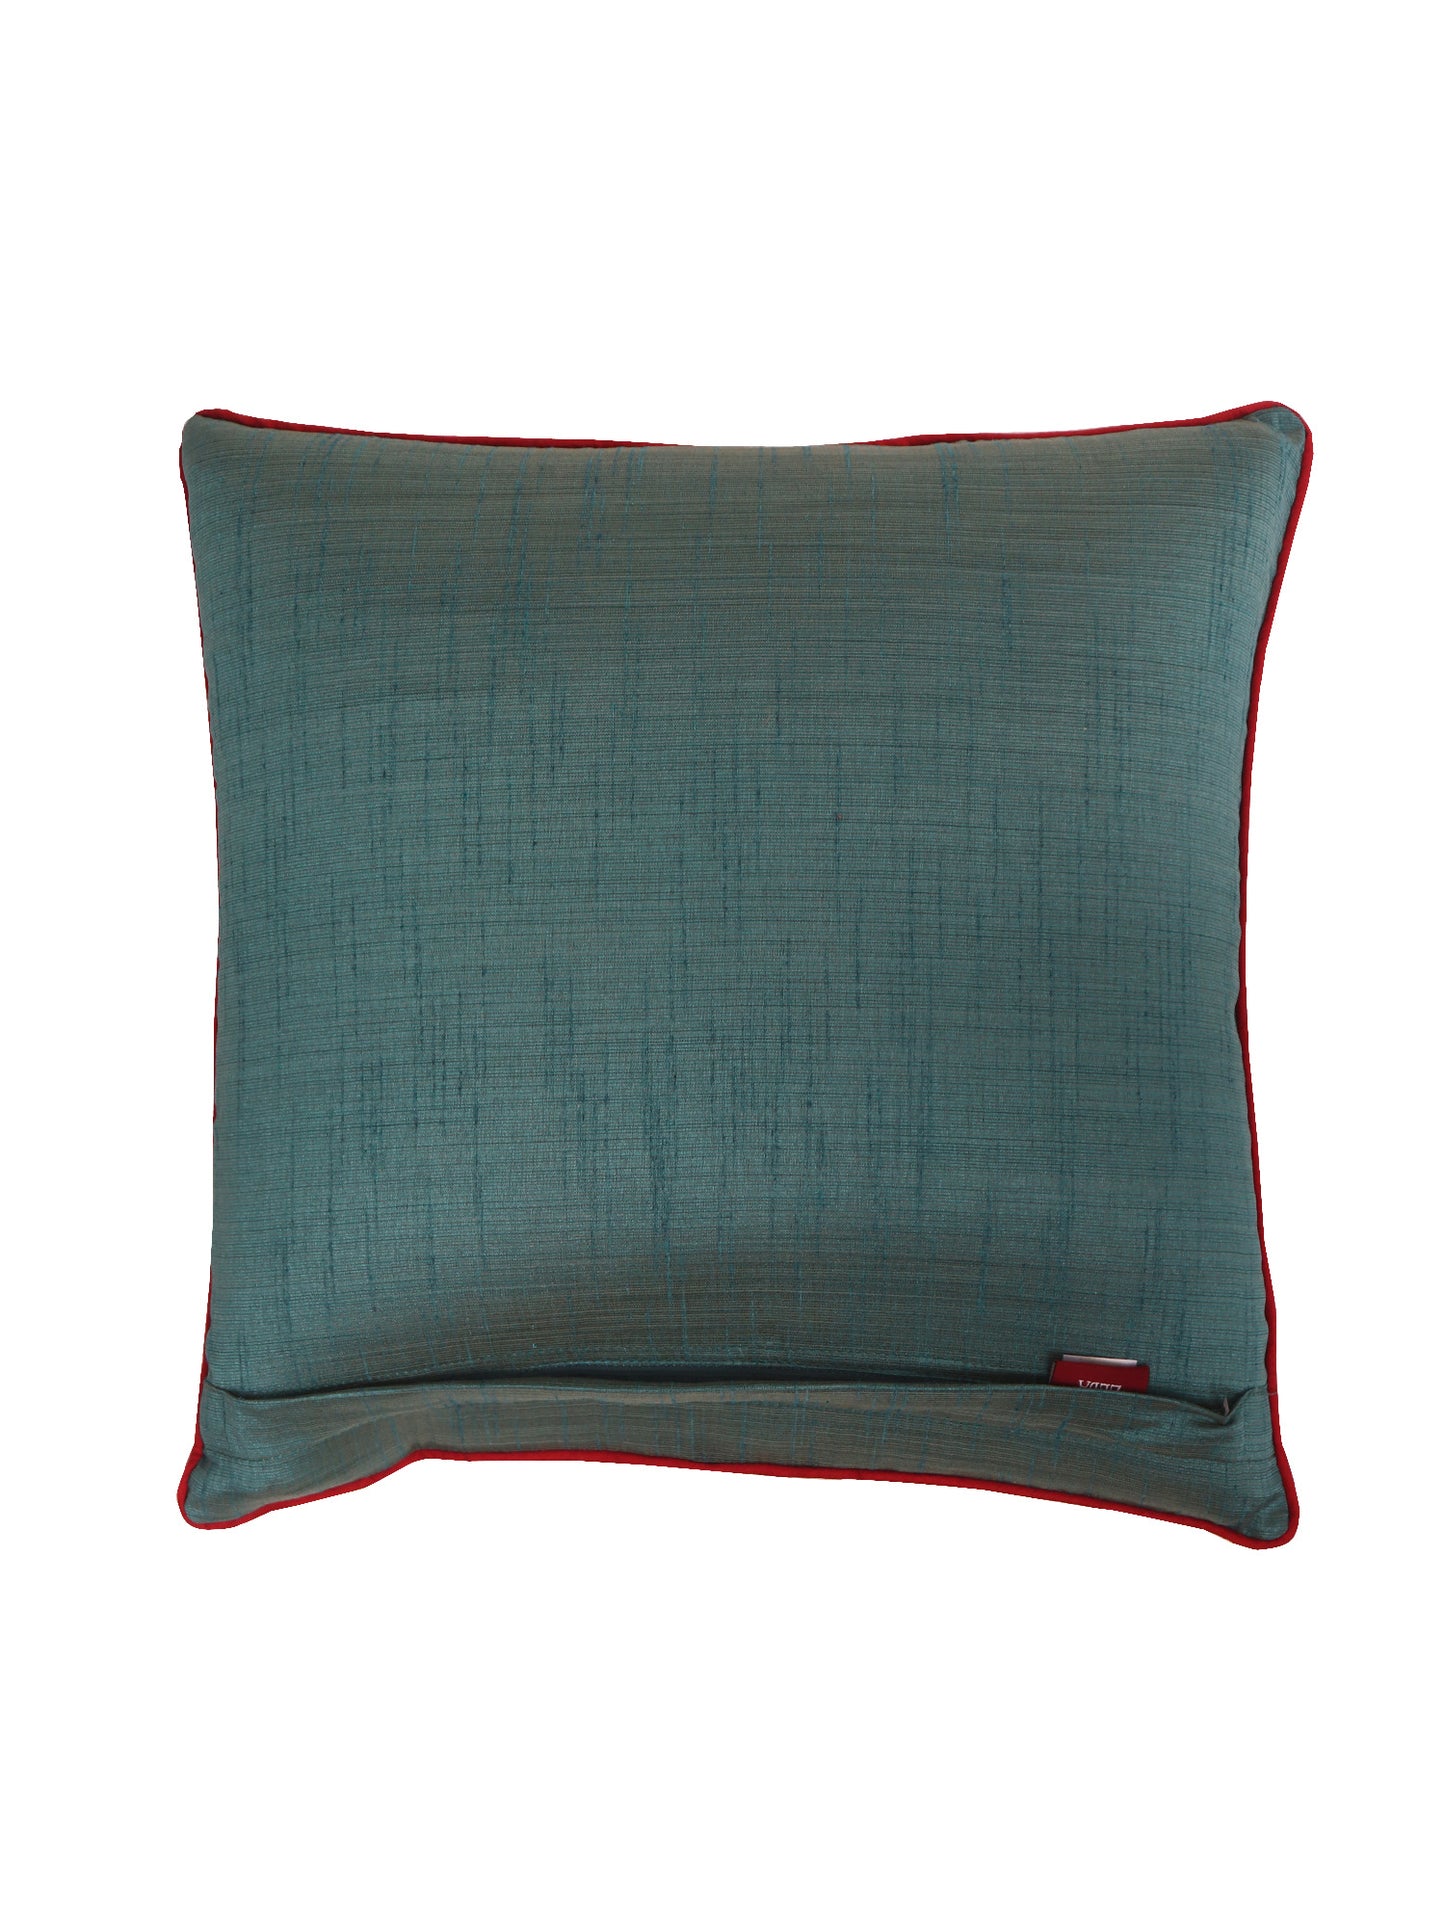 Printed Cushion Cover with Cord Piping and Antique Golden Zari Cotton Polyester Green - 16in x 16in